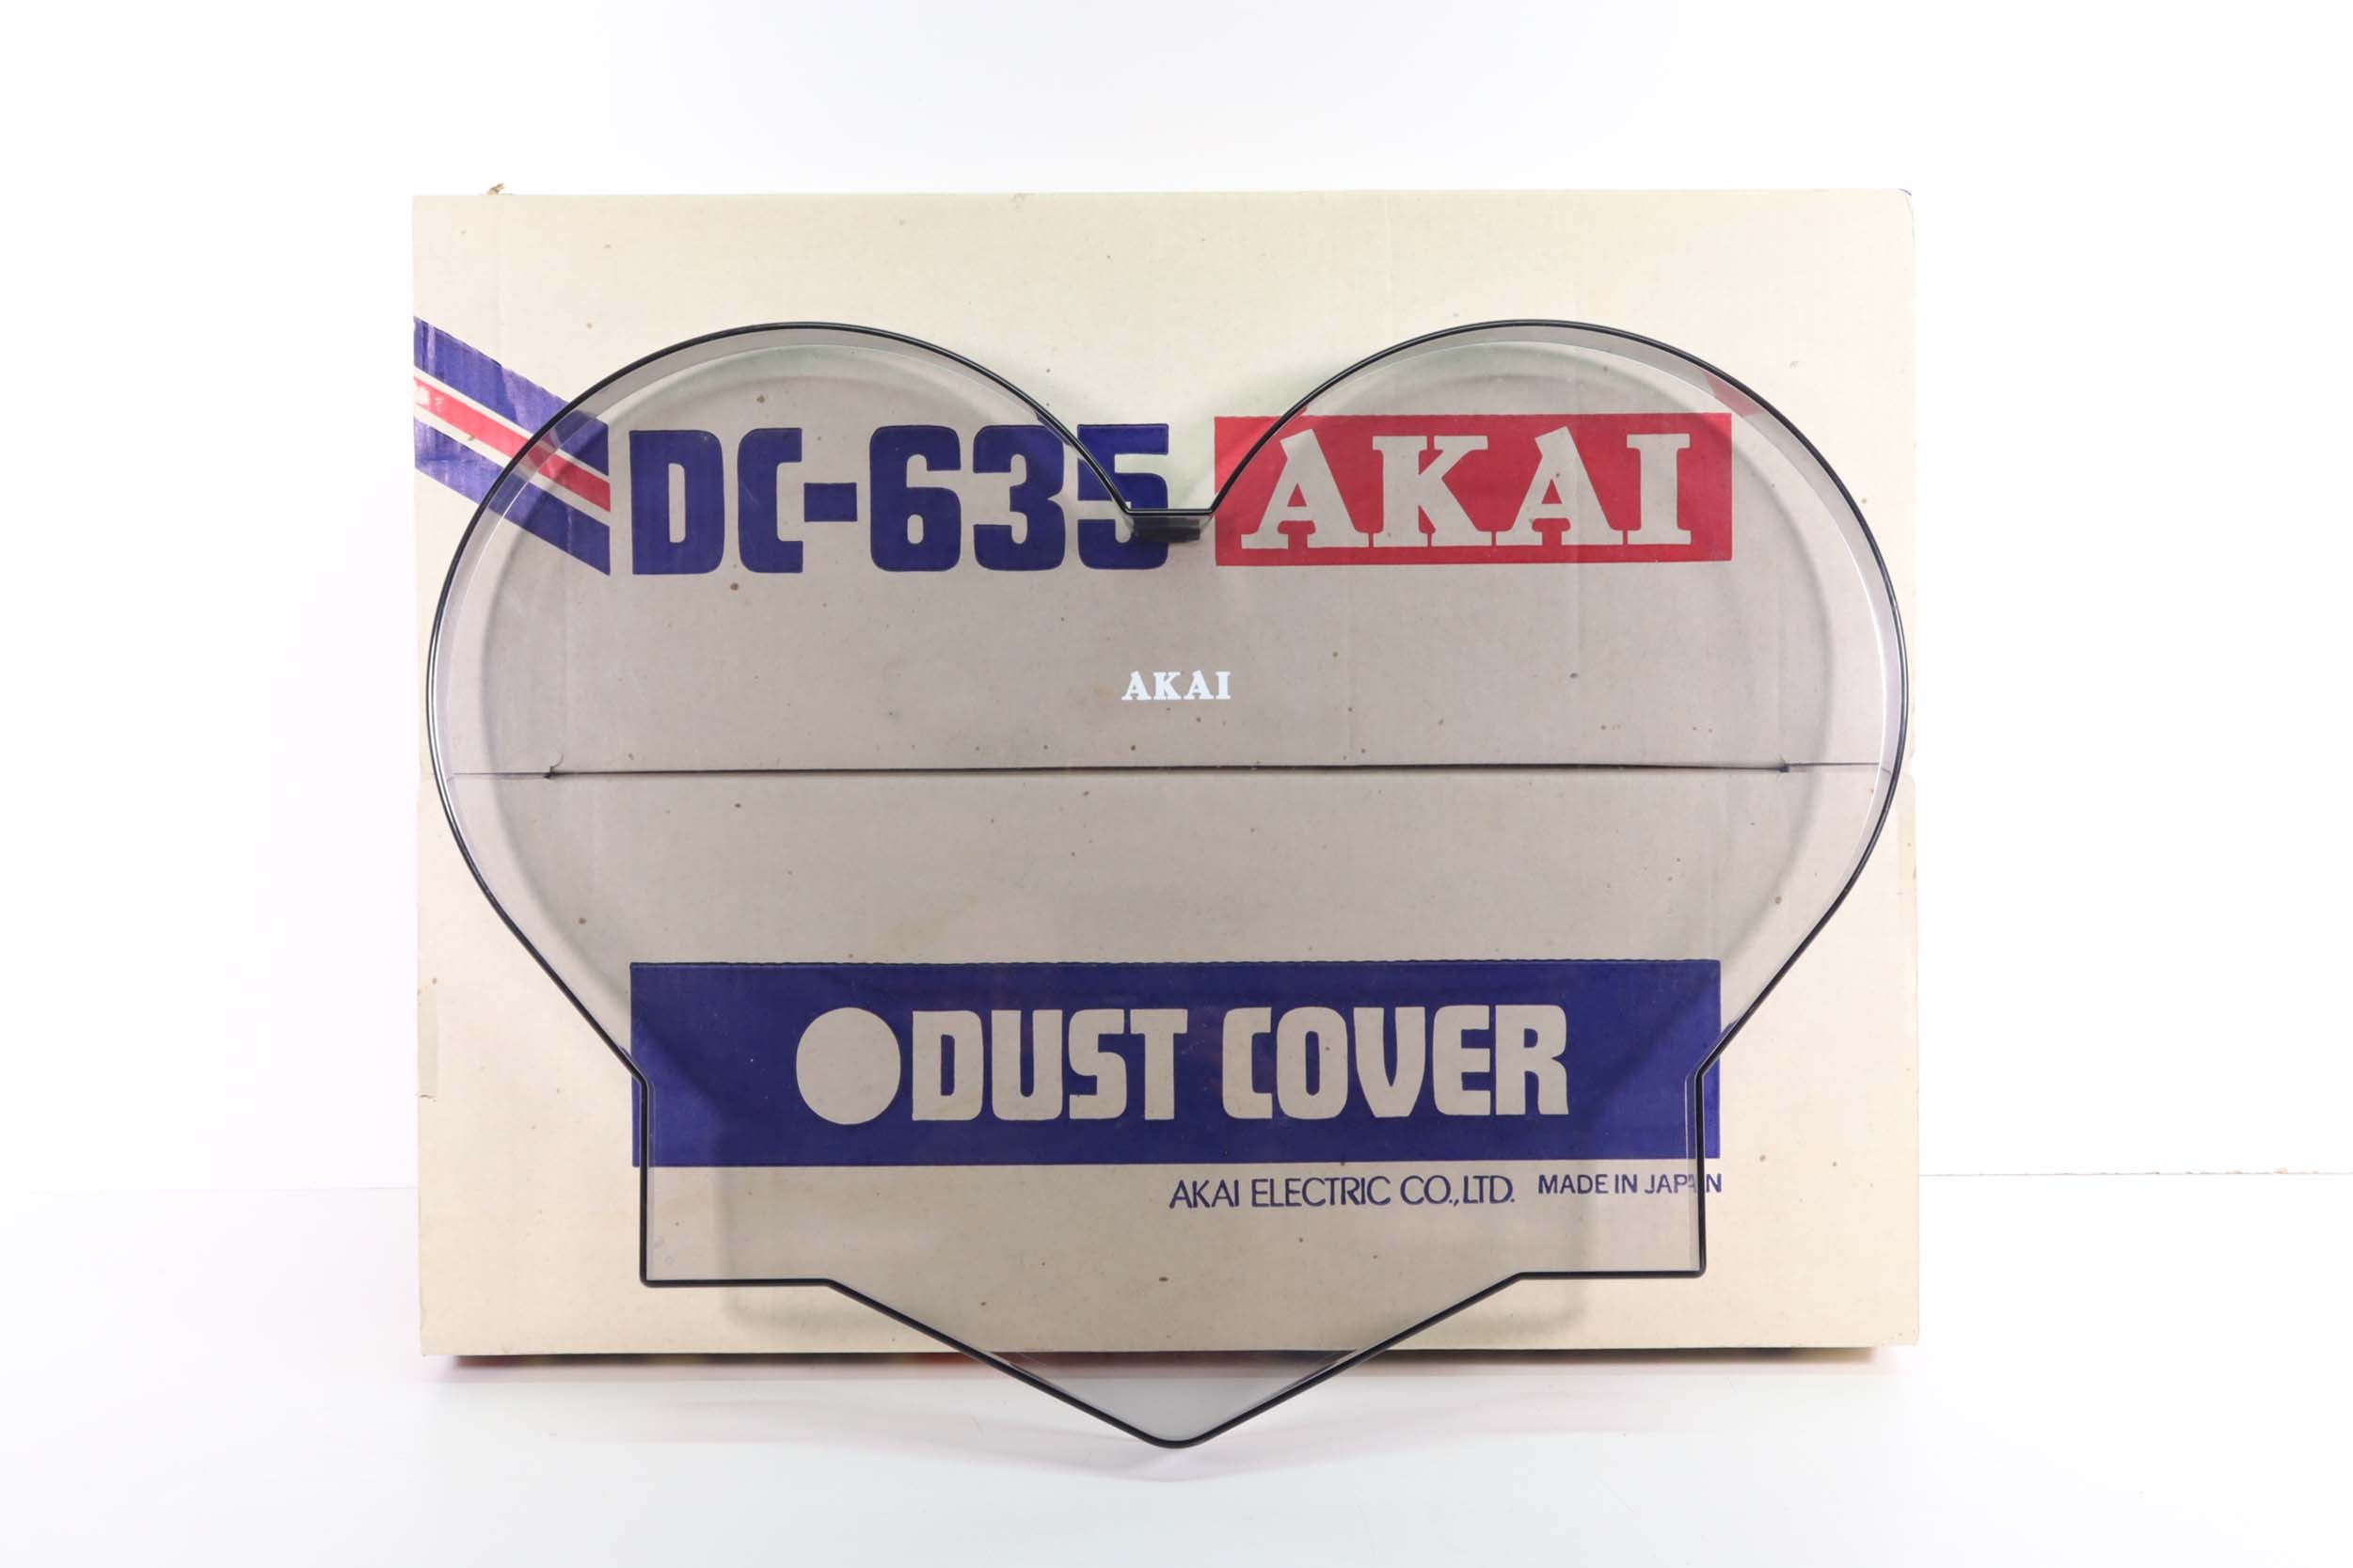 Akai DC-635 Dust Cover for Reel-To-Reel Deck GX-635 and More (with Ori